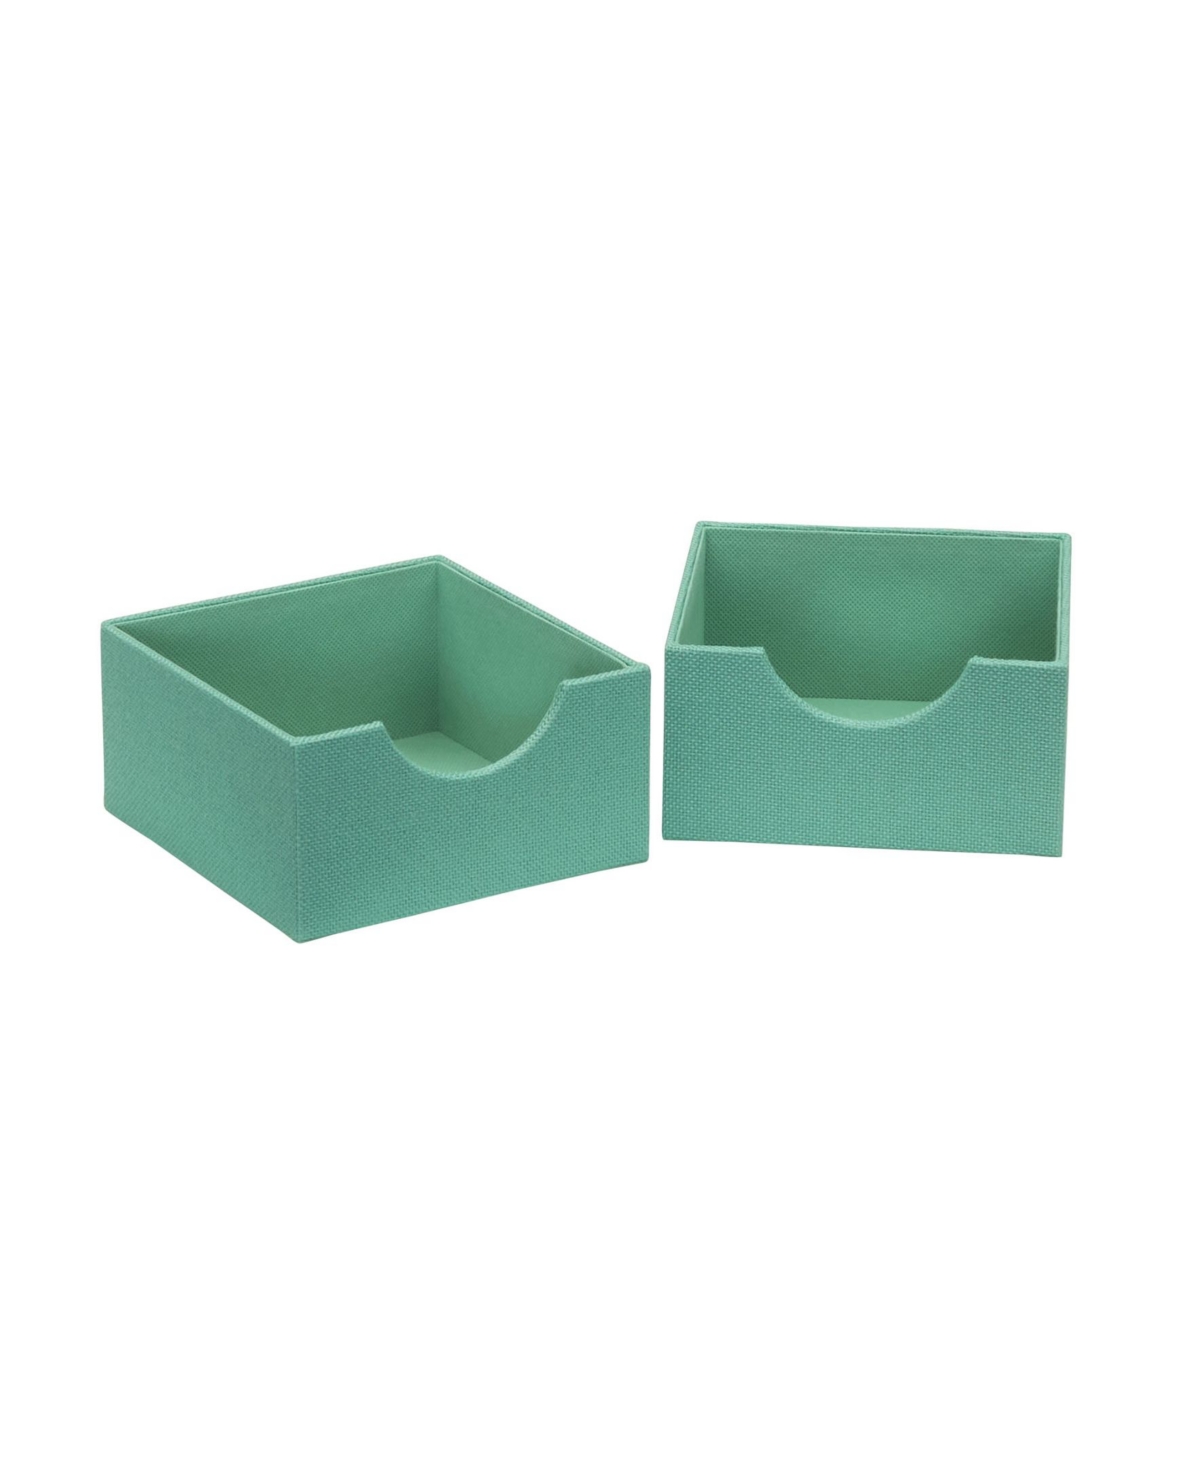 Household Essentials Drawer Organizers, 2 Pieces In Green